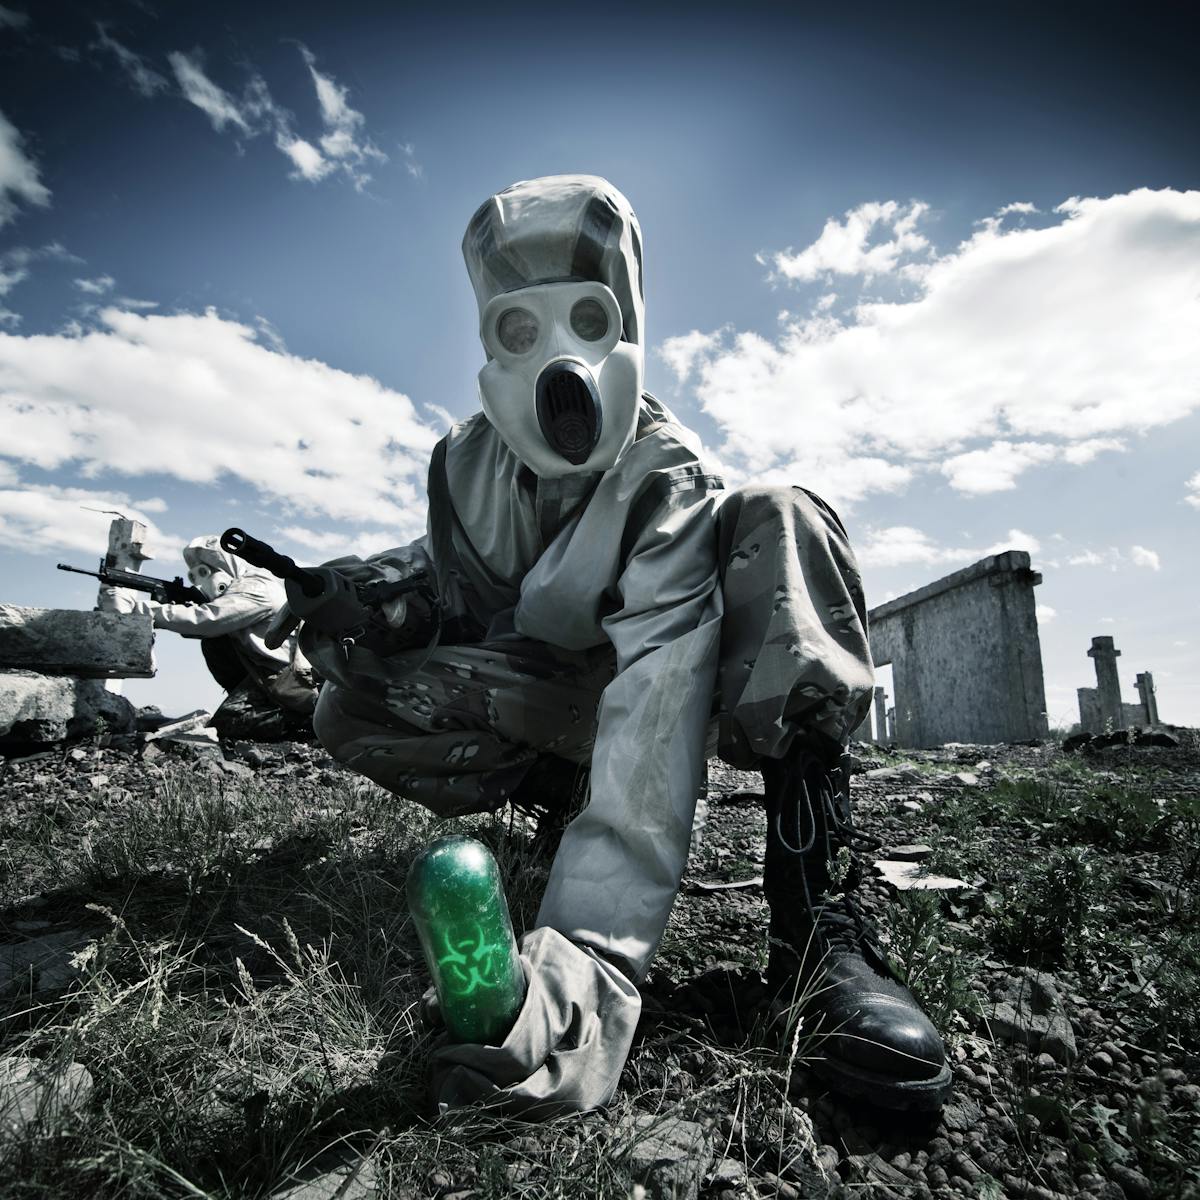 Ukraine war: grim spectre of chemical and biological weapons raises fears of Putin's dirty arsenal